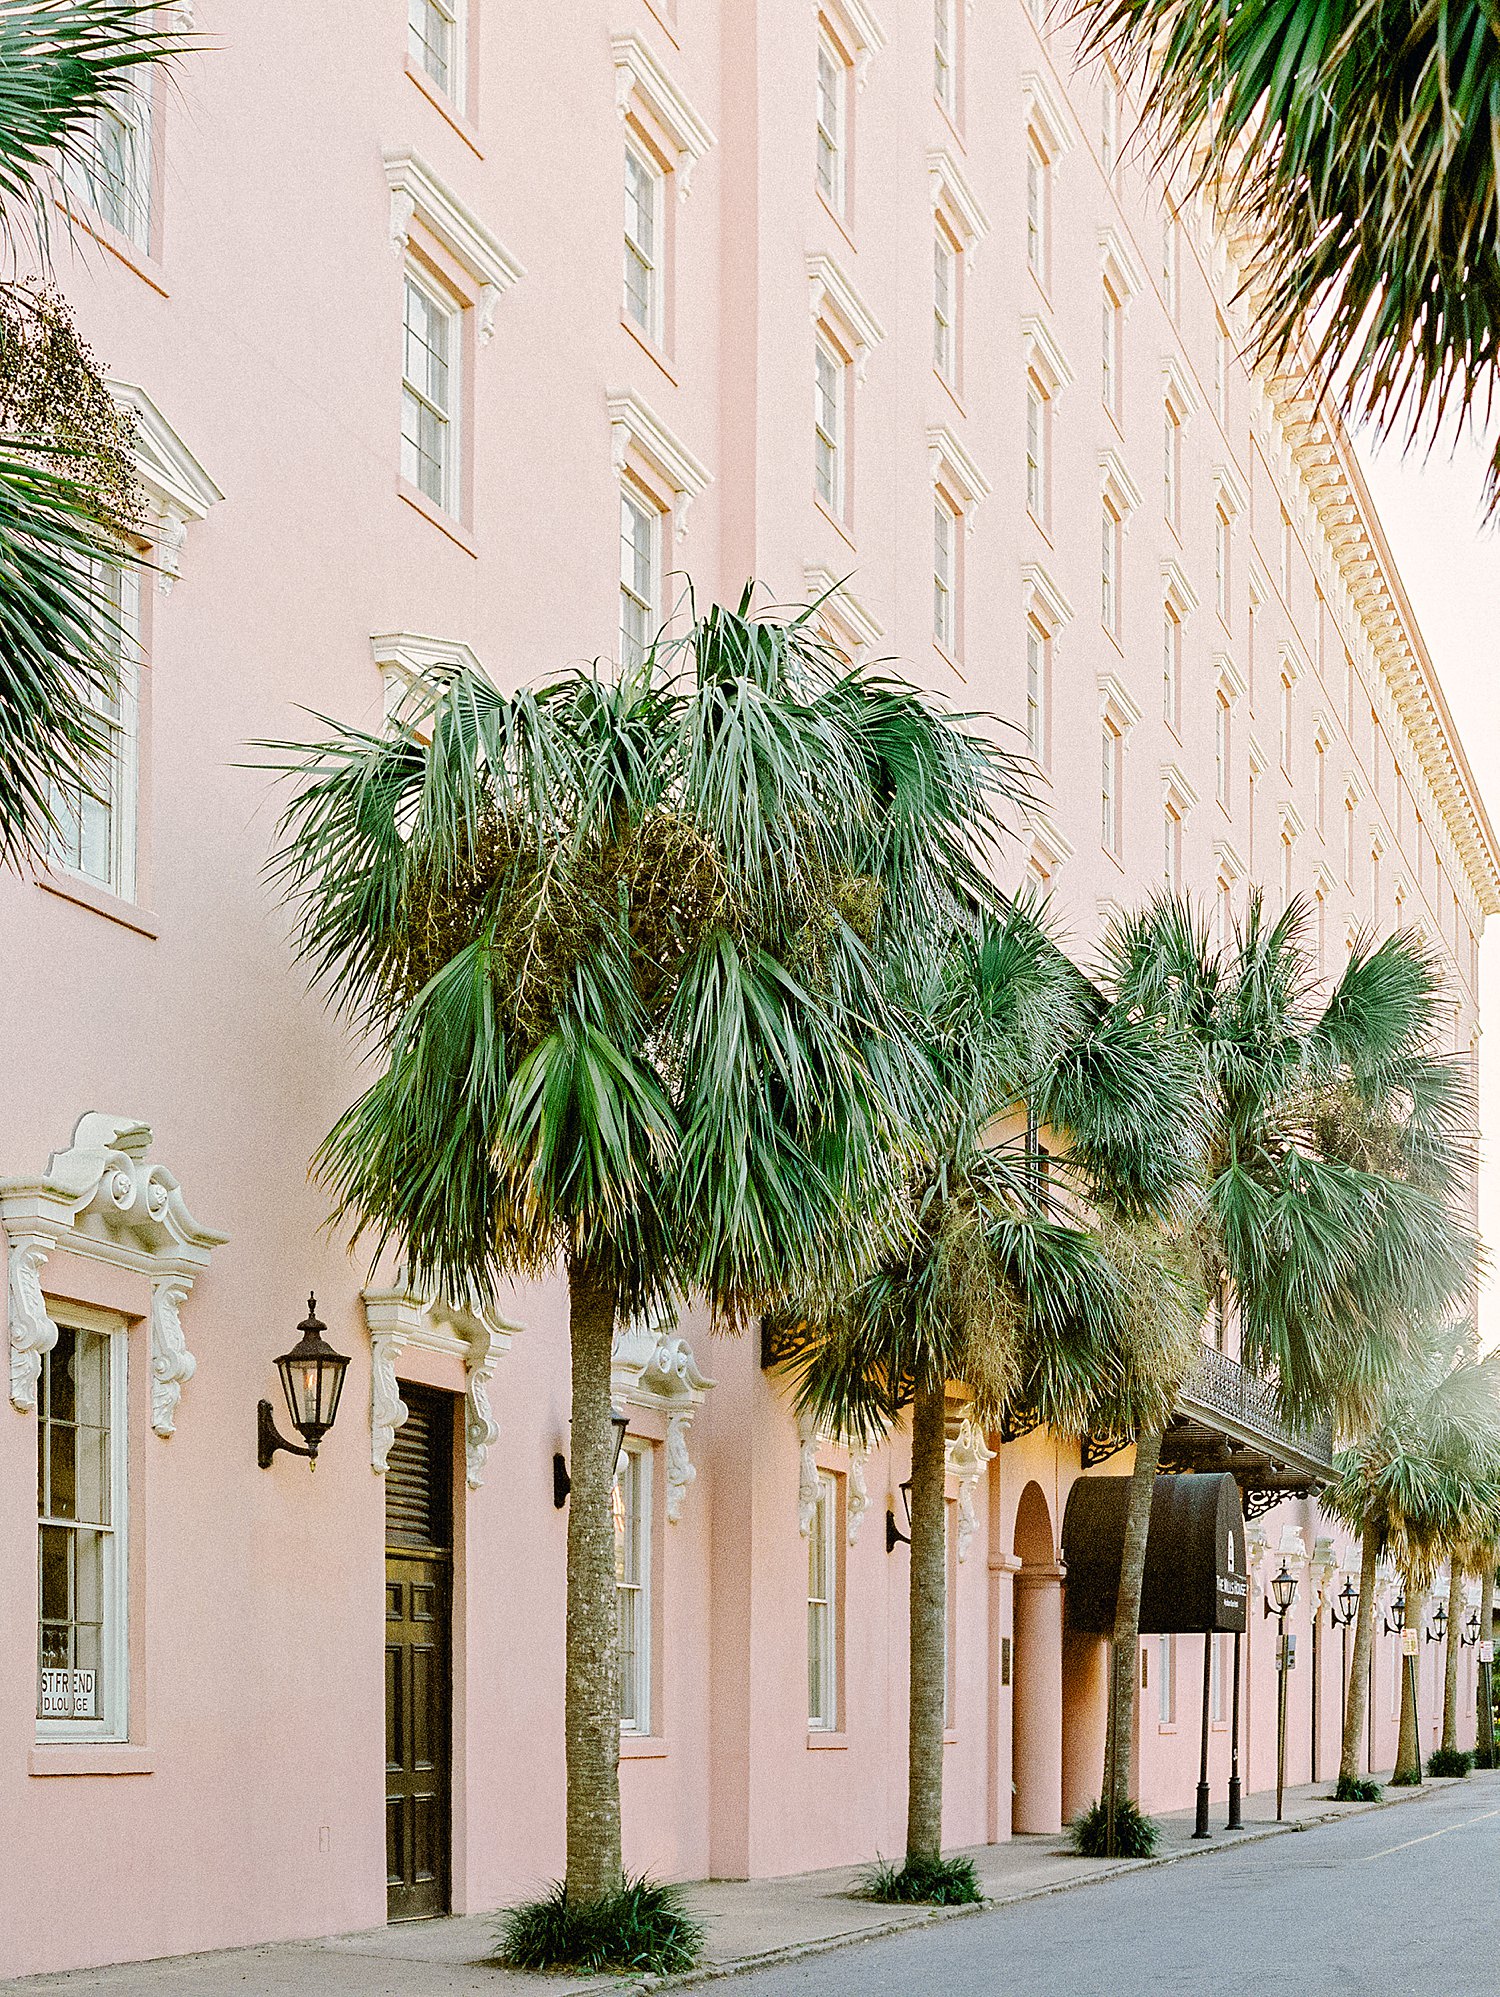 The Mill House Pink hotel facade with palm trees in Charleston